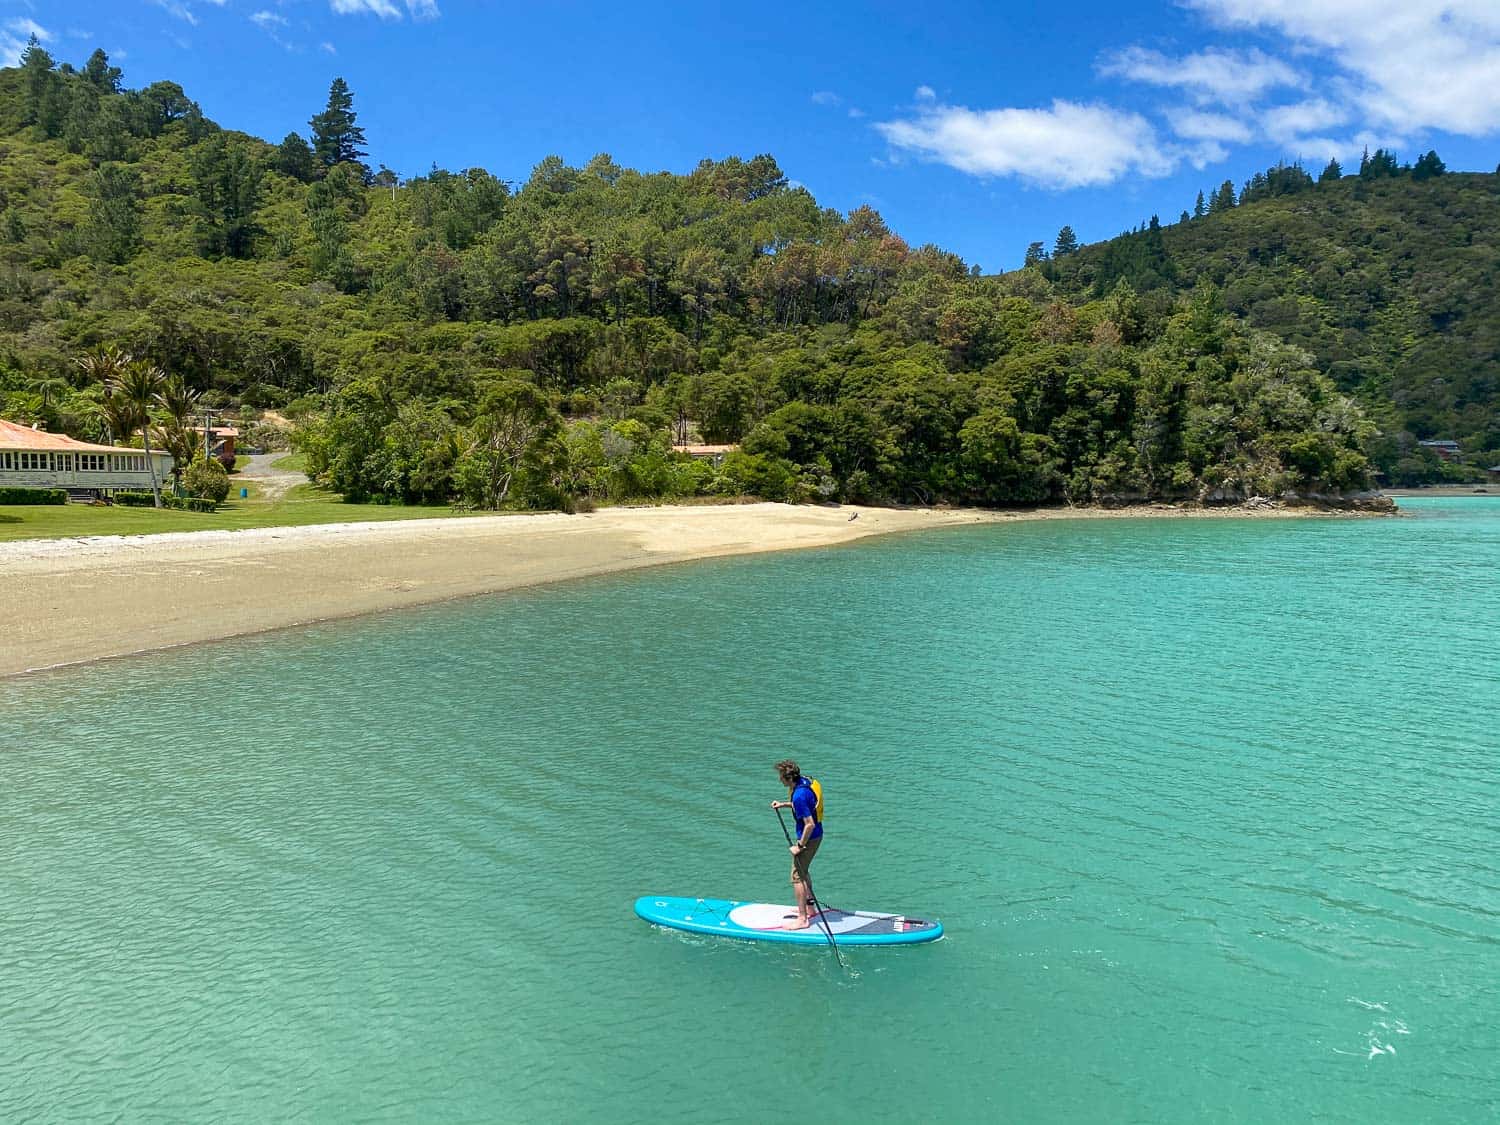 Simon standup paddleboarding at St Omer in the Marlborough Sounds